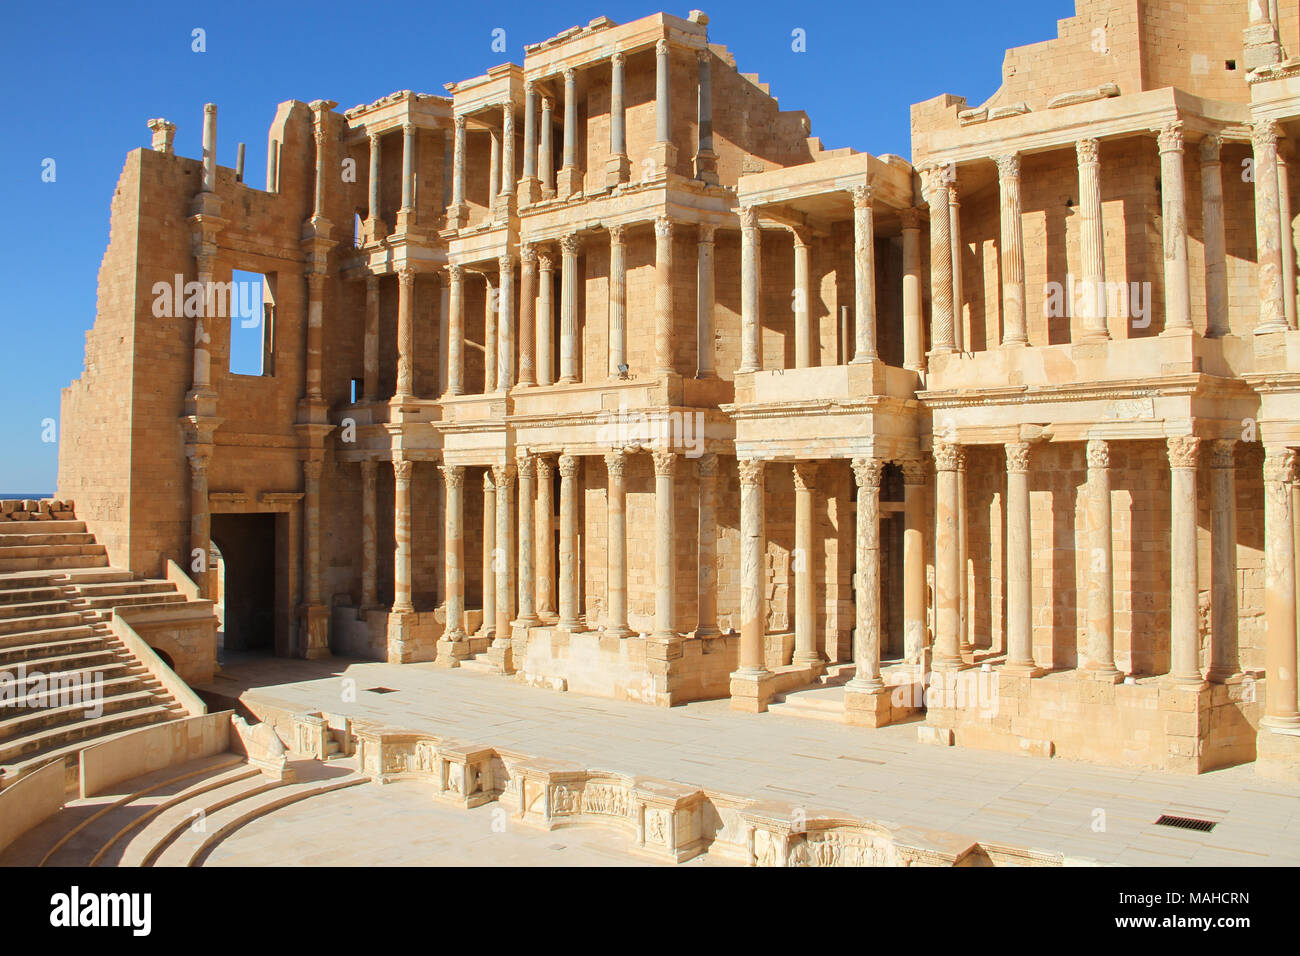 Partialy reconstructed theatre in the ancient Roman city of Sabratha weat of Tripoli, Libya Stock Photo